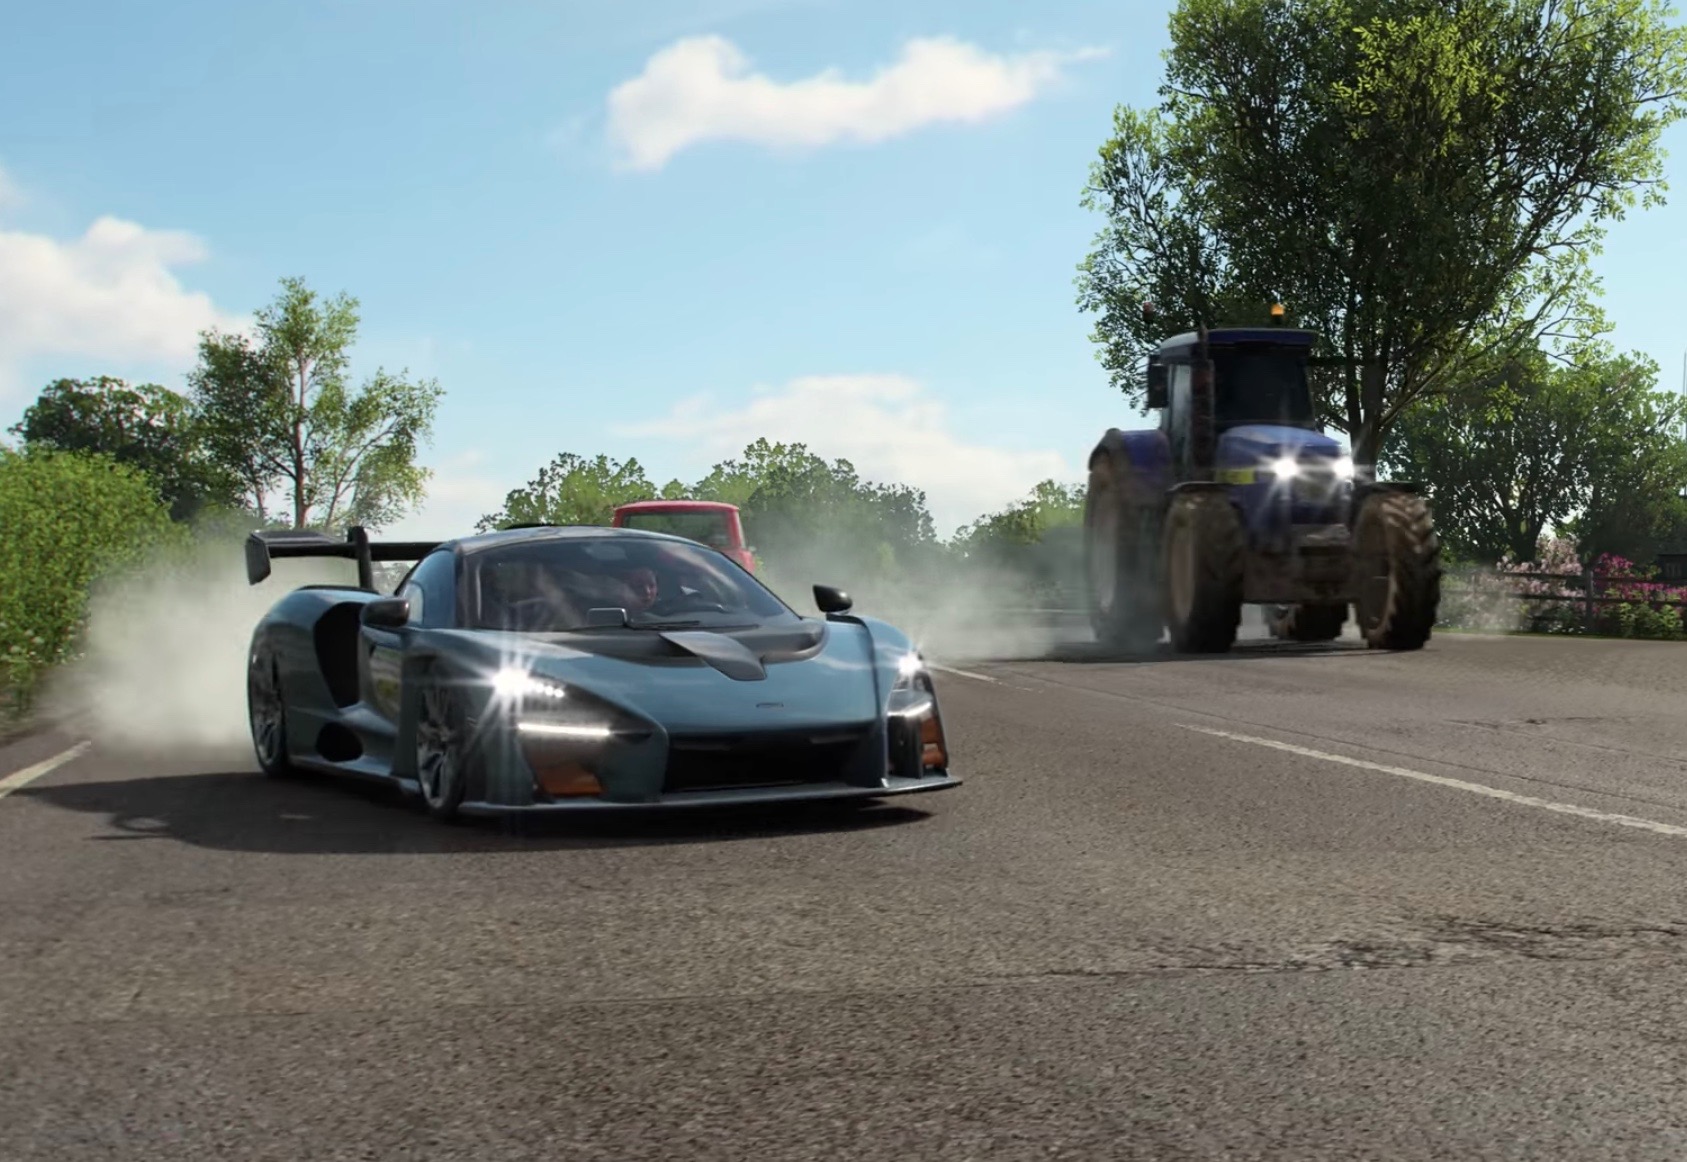 Video: Forza Horizon 4 announced, gameplay based in the UK